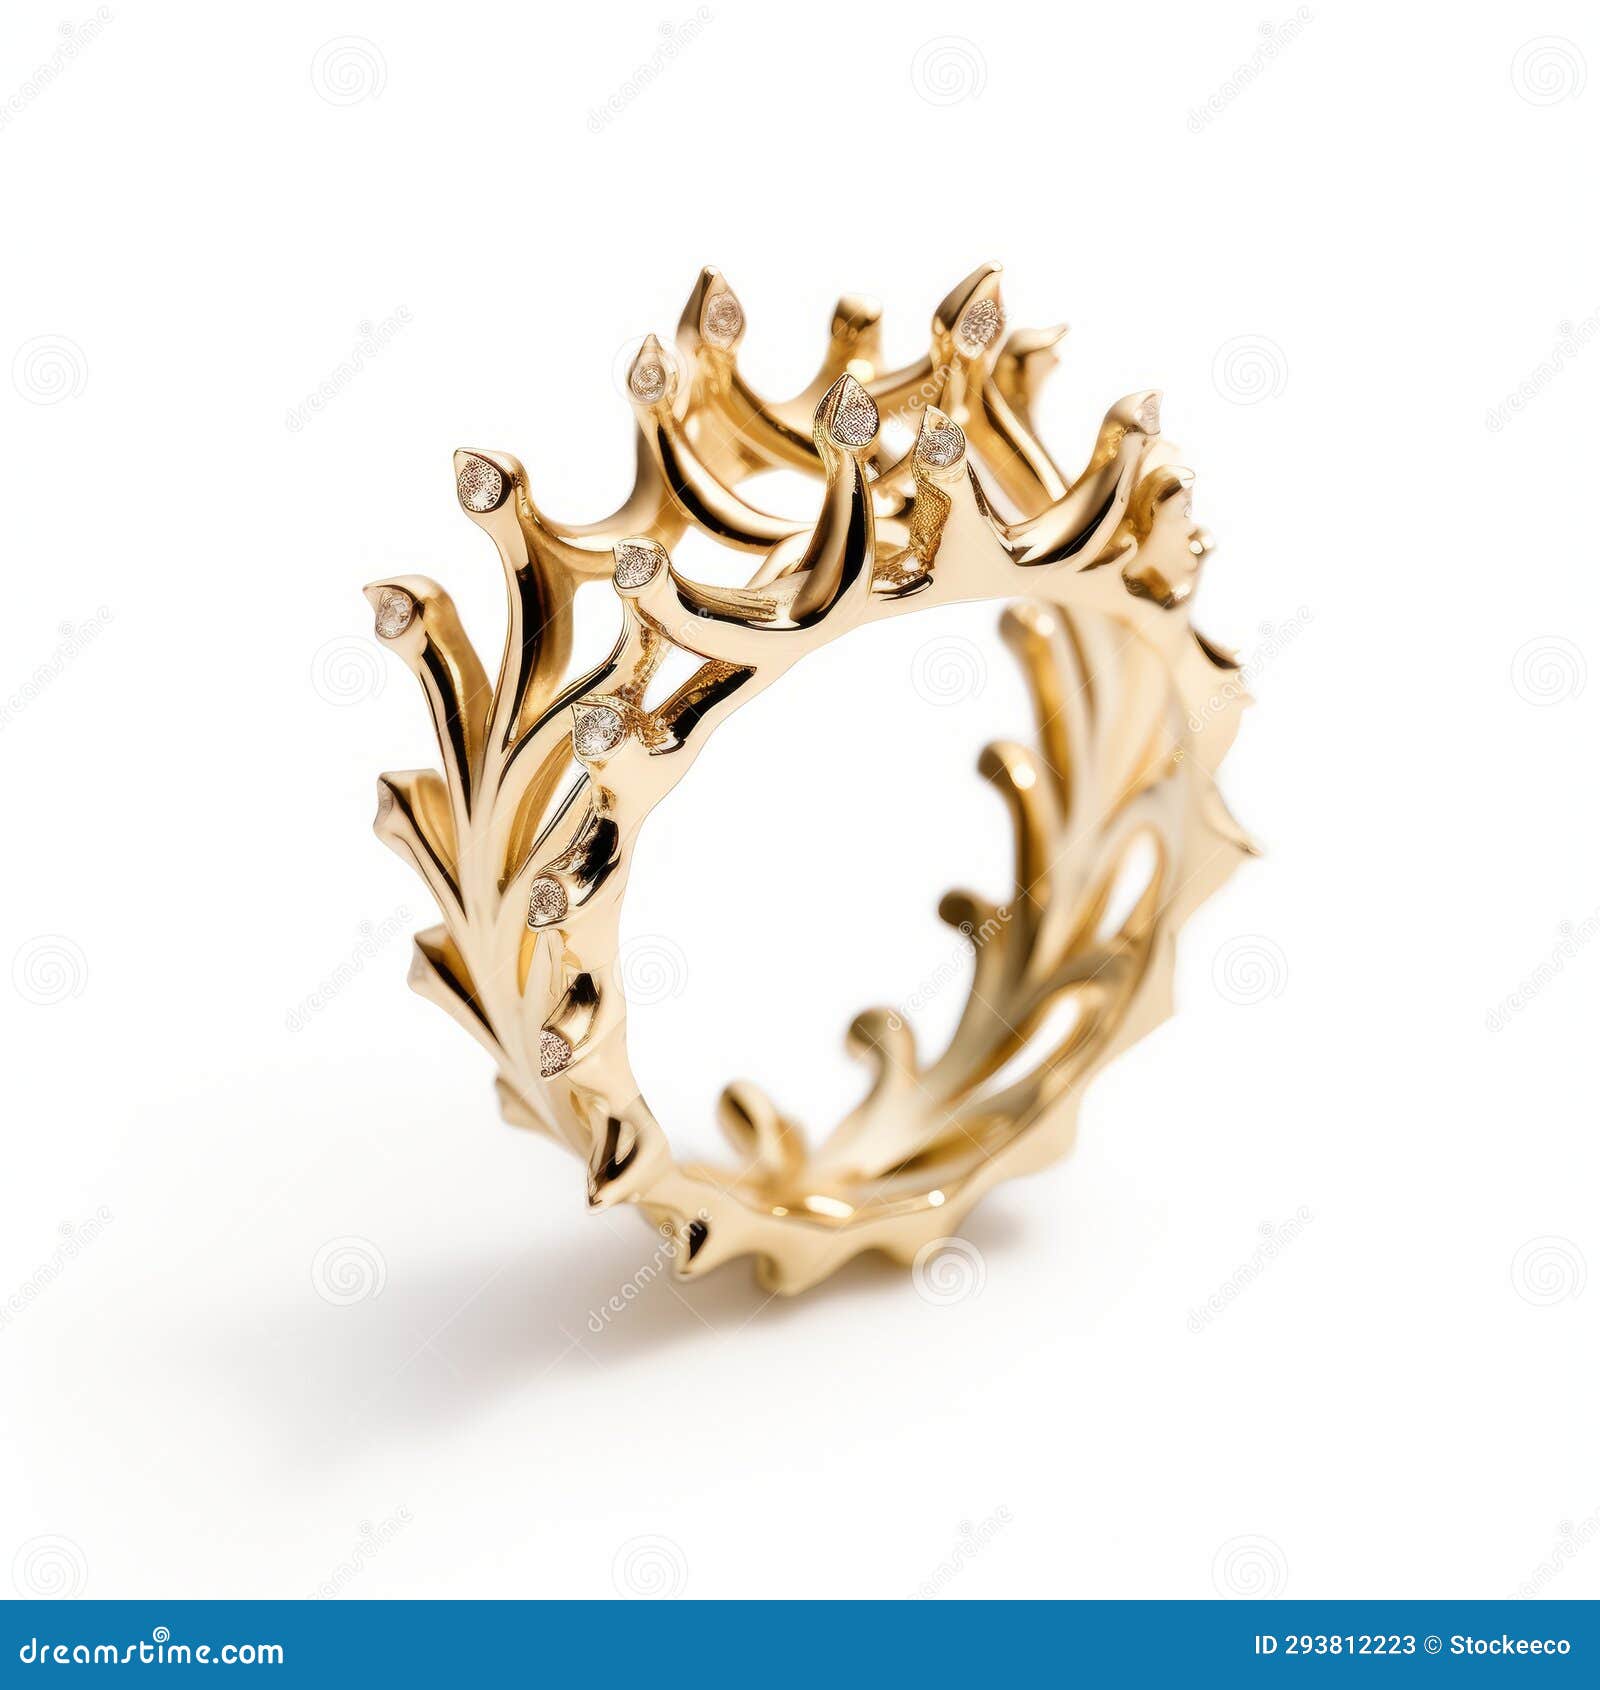 luciana taylor reversible leaf filigree ring - inspired by crown